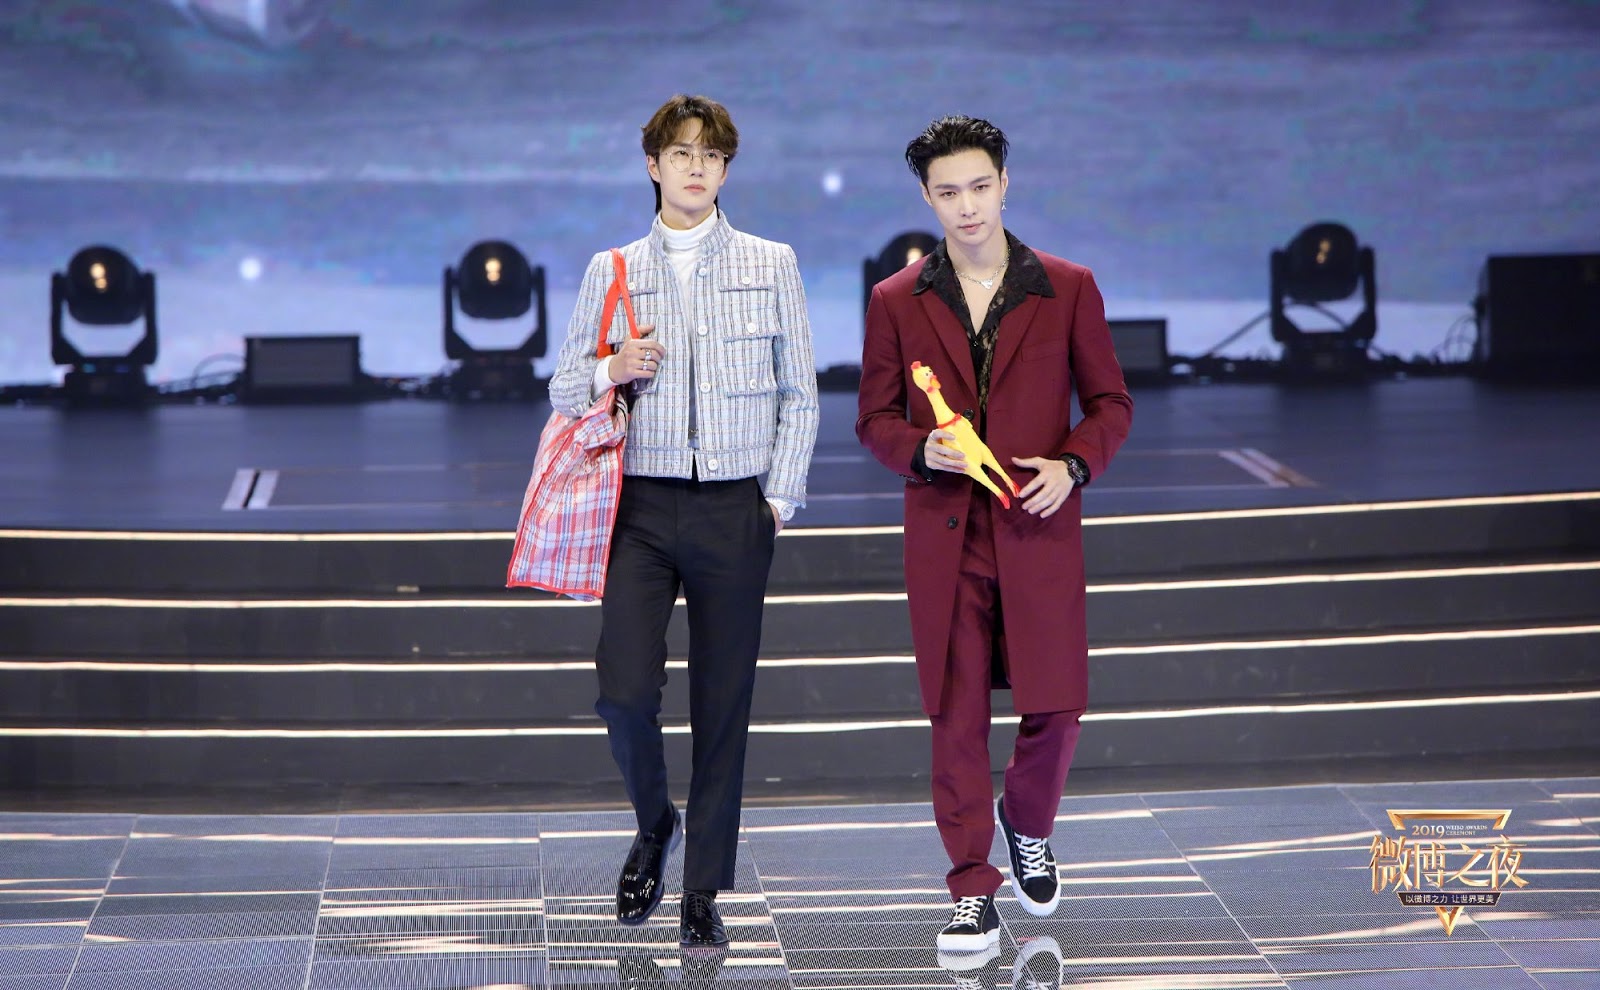 EXO’s Lay And UNIQ’s Wang Yibo Were Serious Friendship Goals At A Recent Award Show